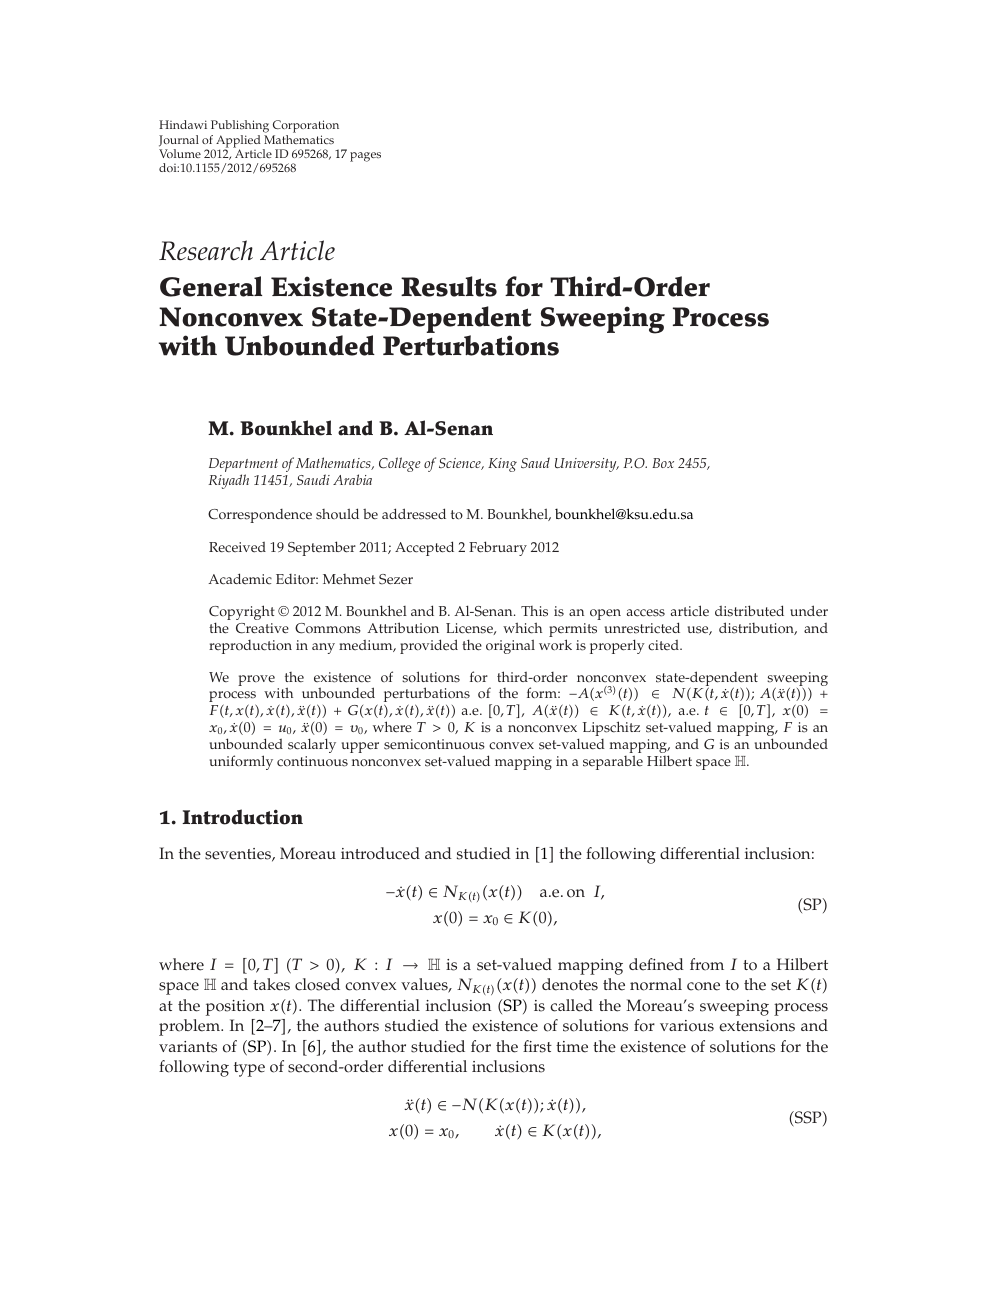 General Existence Results For Third Order Nonconvex State Dependent Sweeping Process With Unbounded Perturbations Topic Of Research Paper In Mathematics Download Scholarly Article Pdf And Read For Free On Cyberleninka Open Science Hub